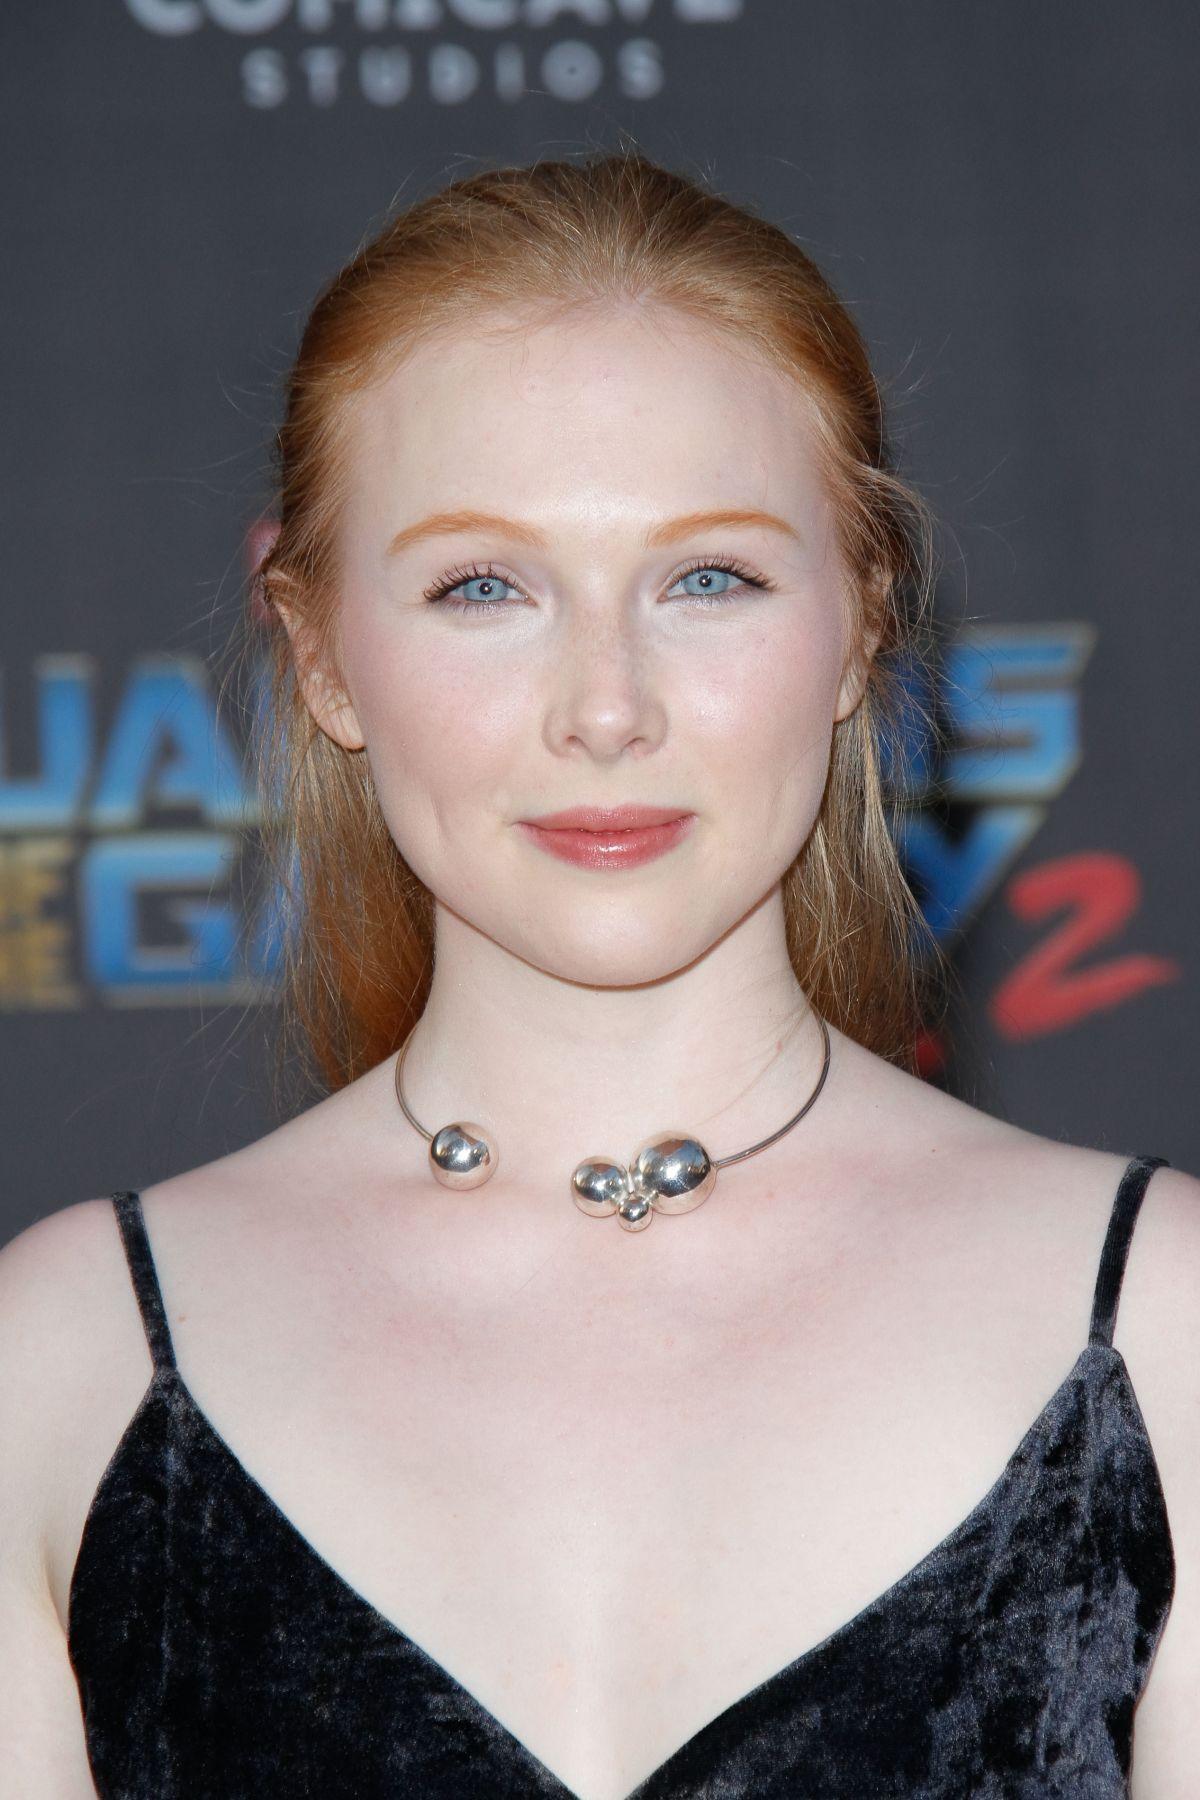 70+ Hot Pictures Of Molly C. Quinn Are God’s Gift For Her Die Hard Fans 149